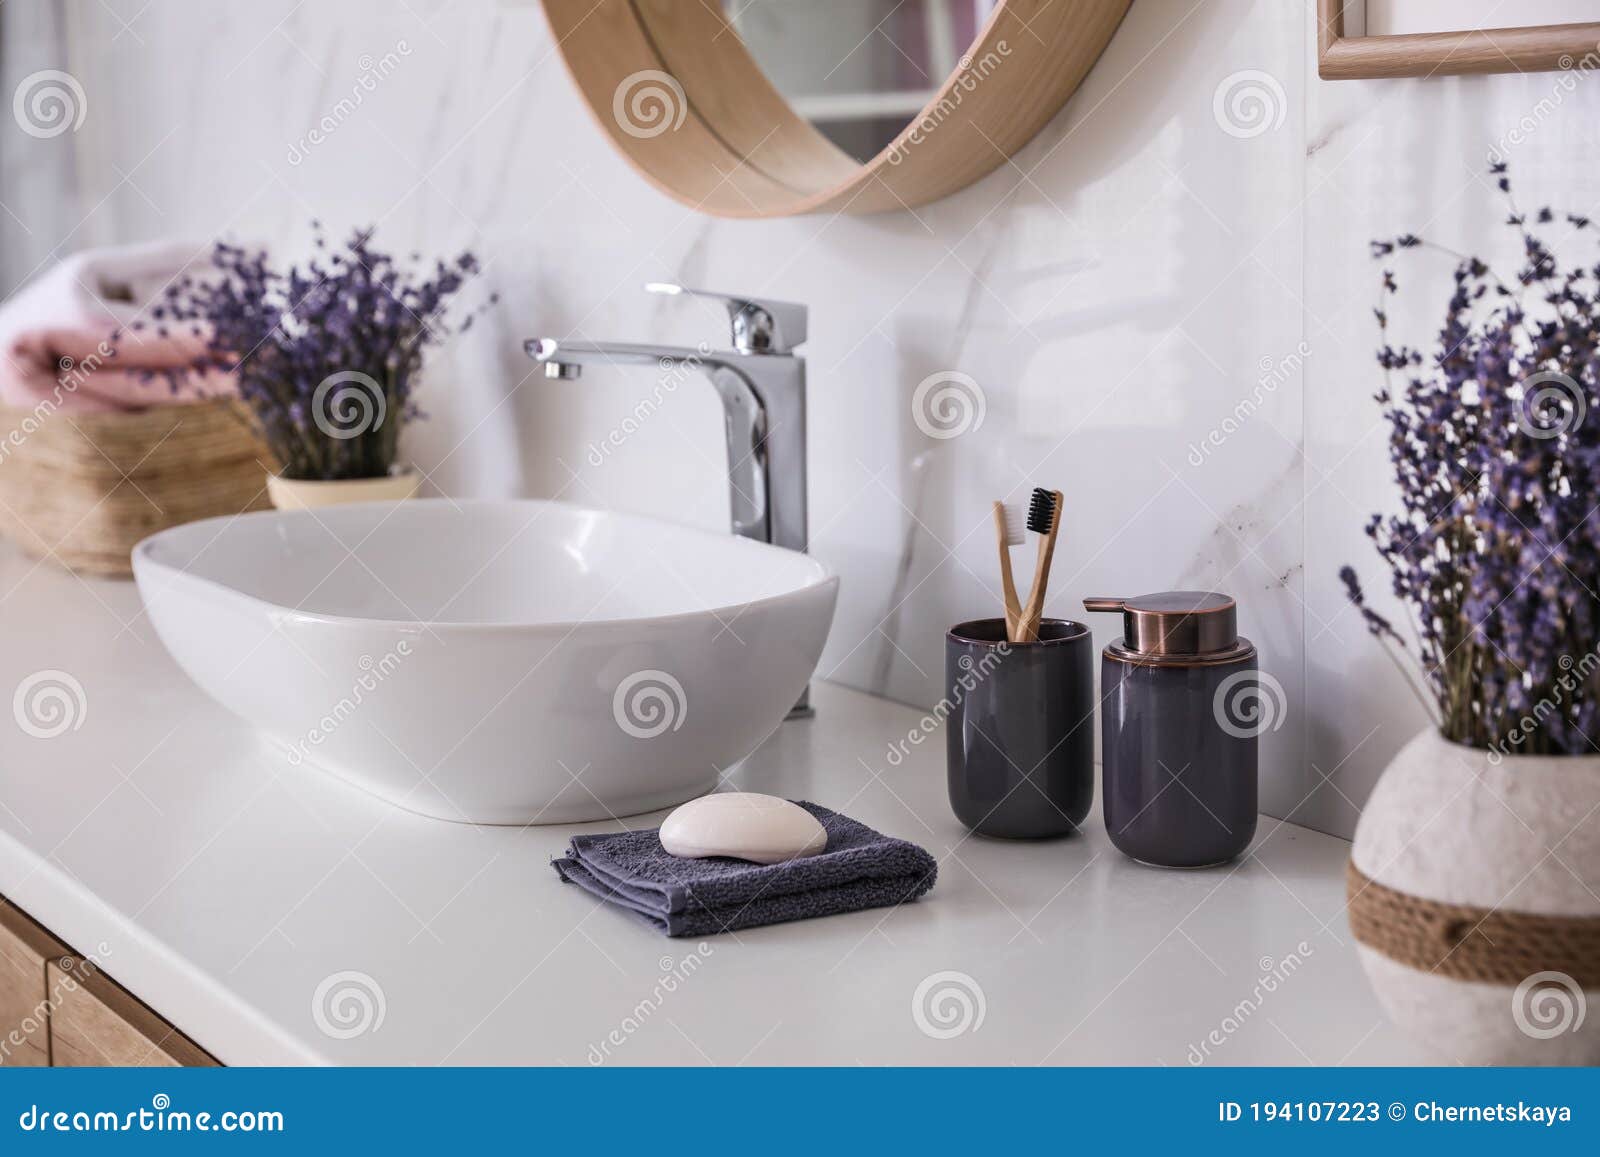 bathroom counter with vessel sink, accessories and flowers. interior